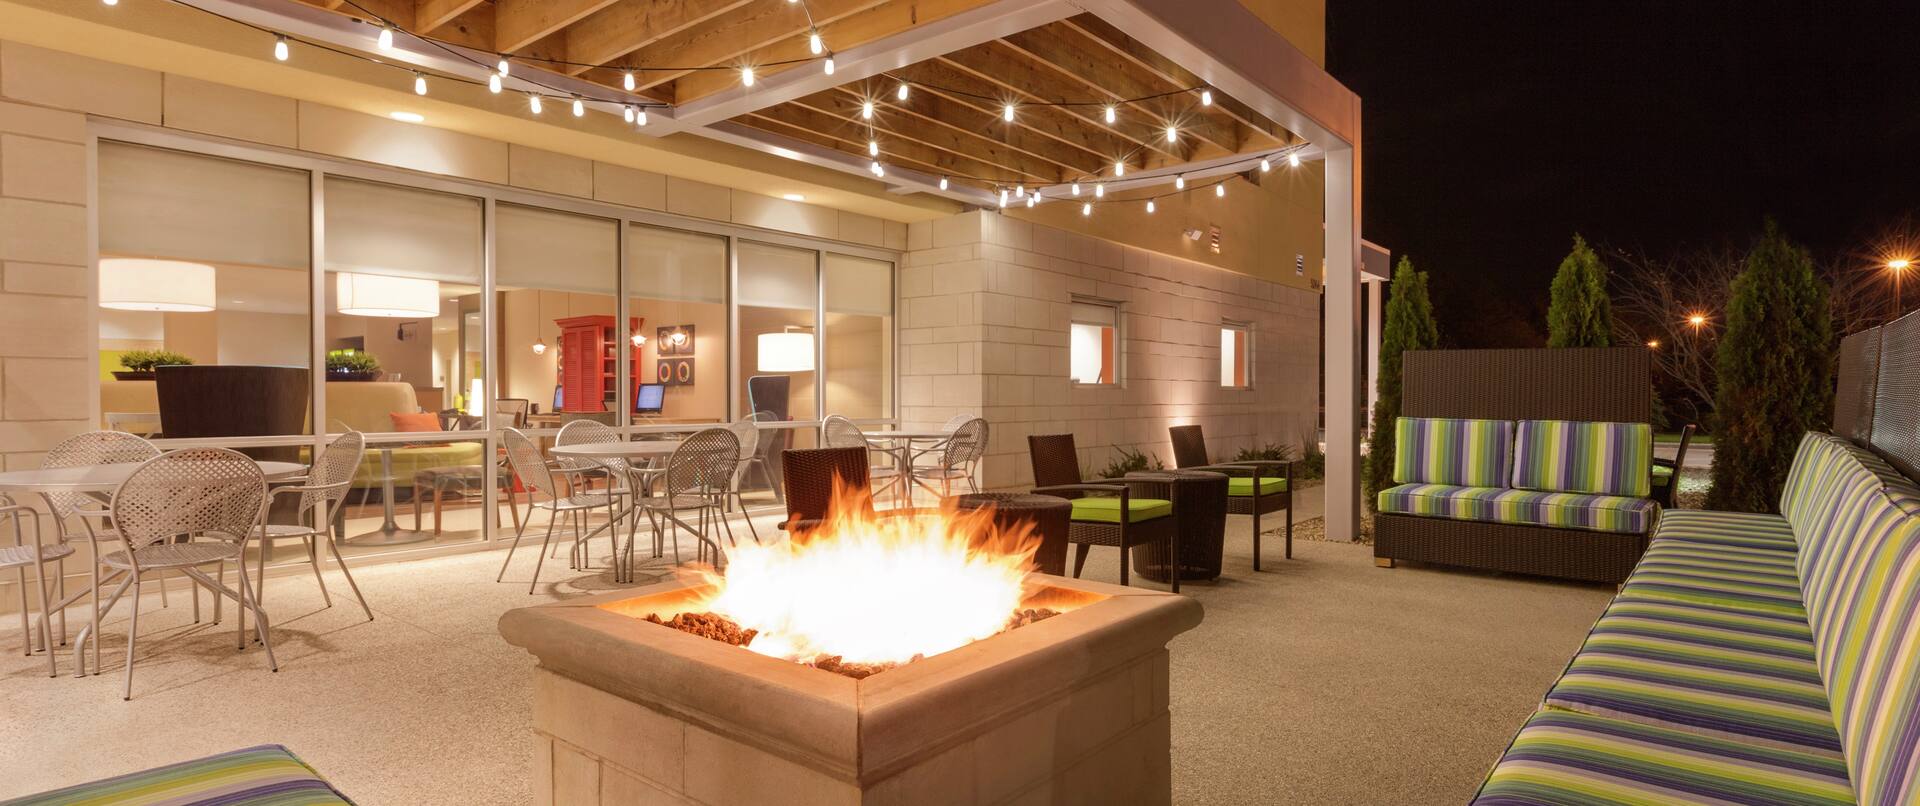 Outdoor Lounge Area with Fire Pit Table at Night